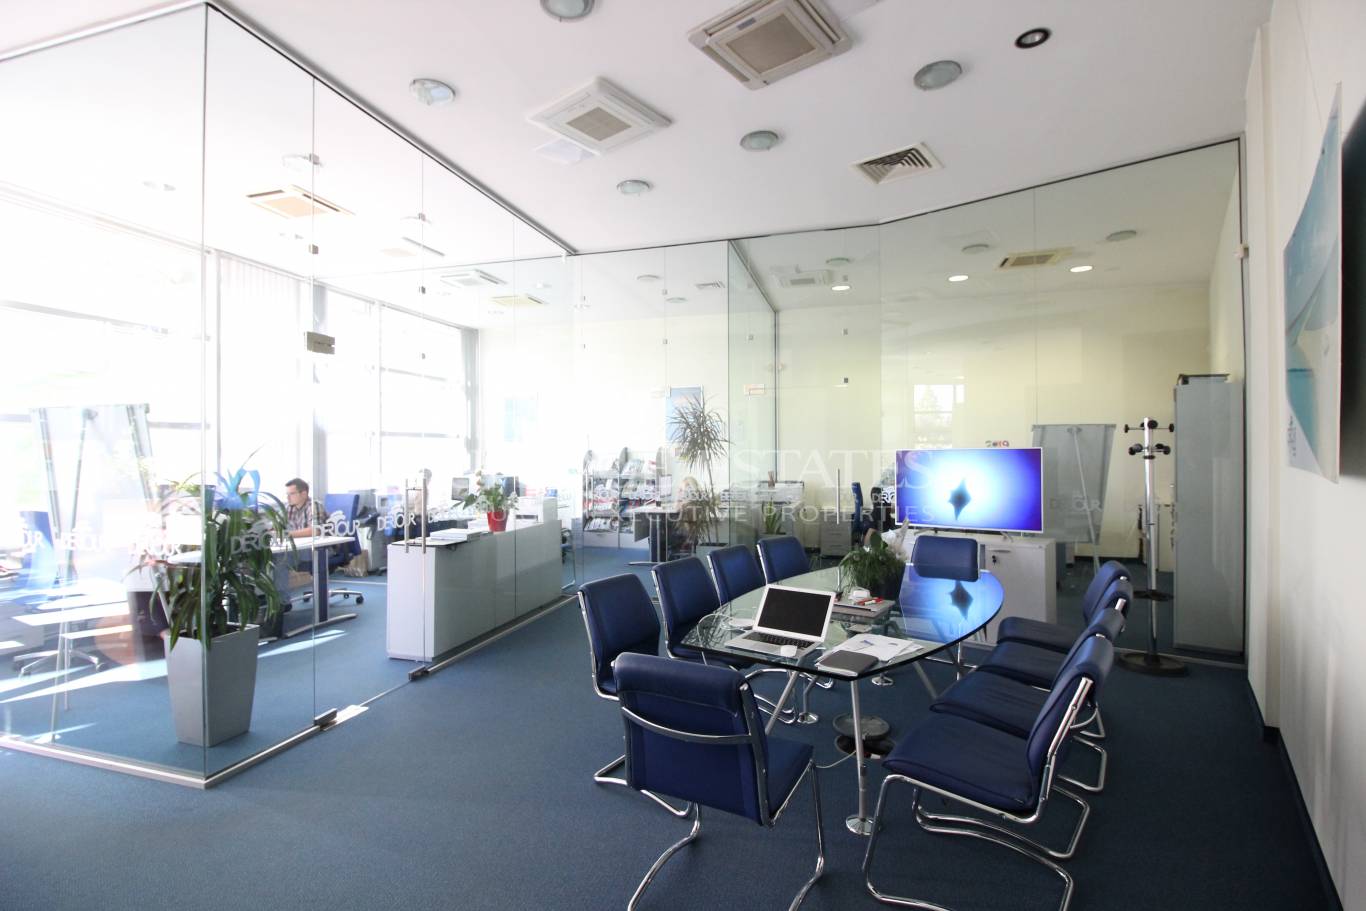 Office for sale in Sofia, Bulgaria Blvd with listing ID: K12108 - image 3